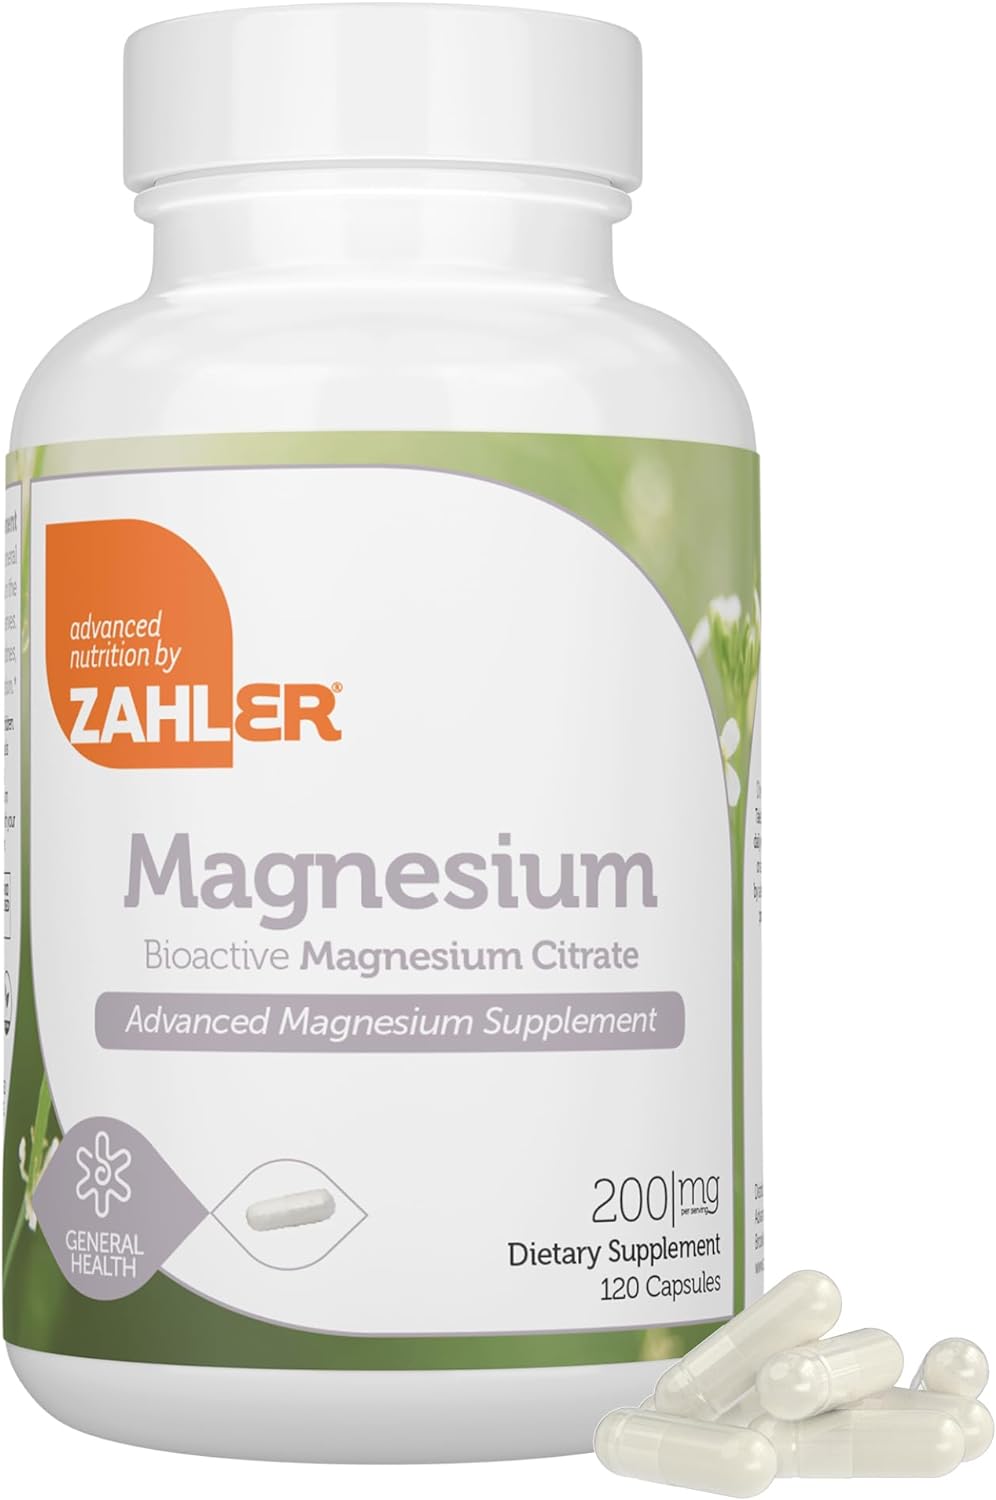 Zahler - Magnesium Supplement Capsules 200 mg (120 Count) Certified Kosher Bioactive Magnesium Citrate for Max Absorption - Natural Magnesium Mineral for Men & Women - Best Magnesium Supplements